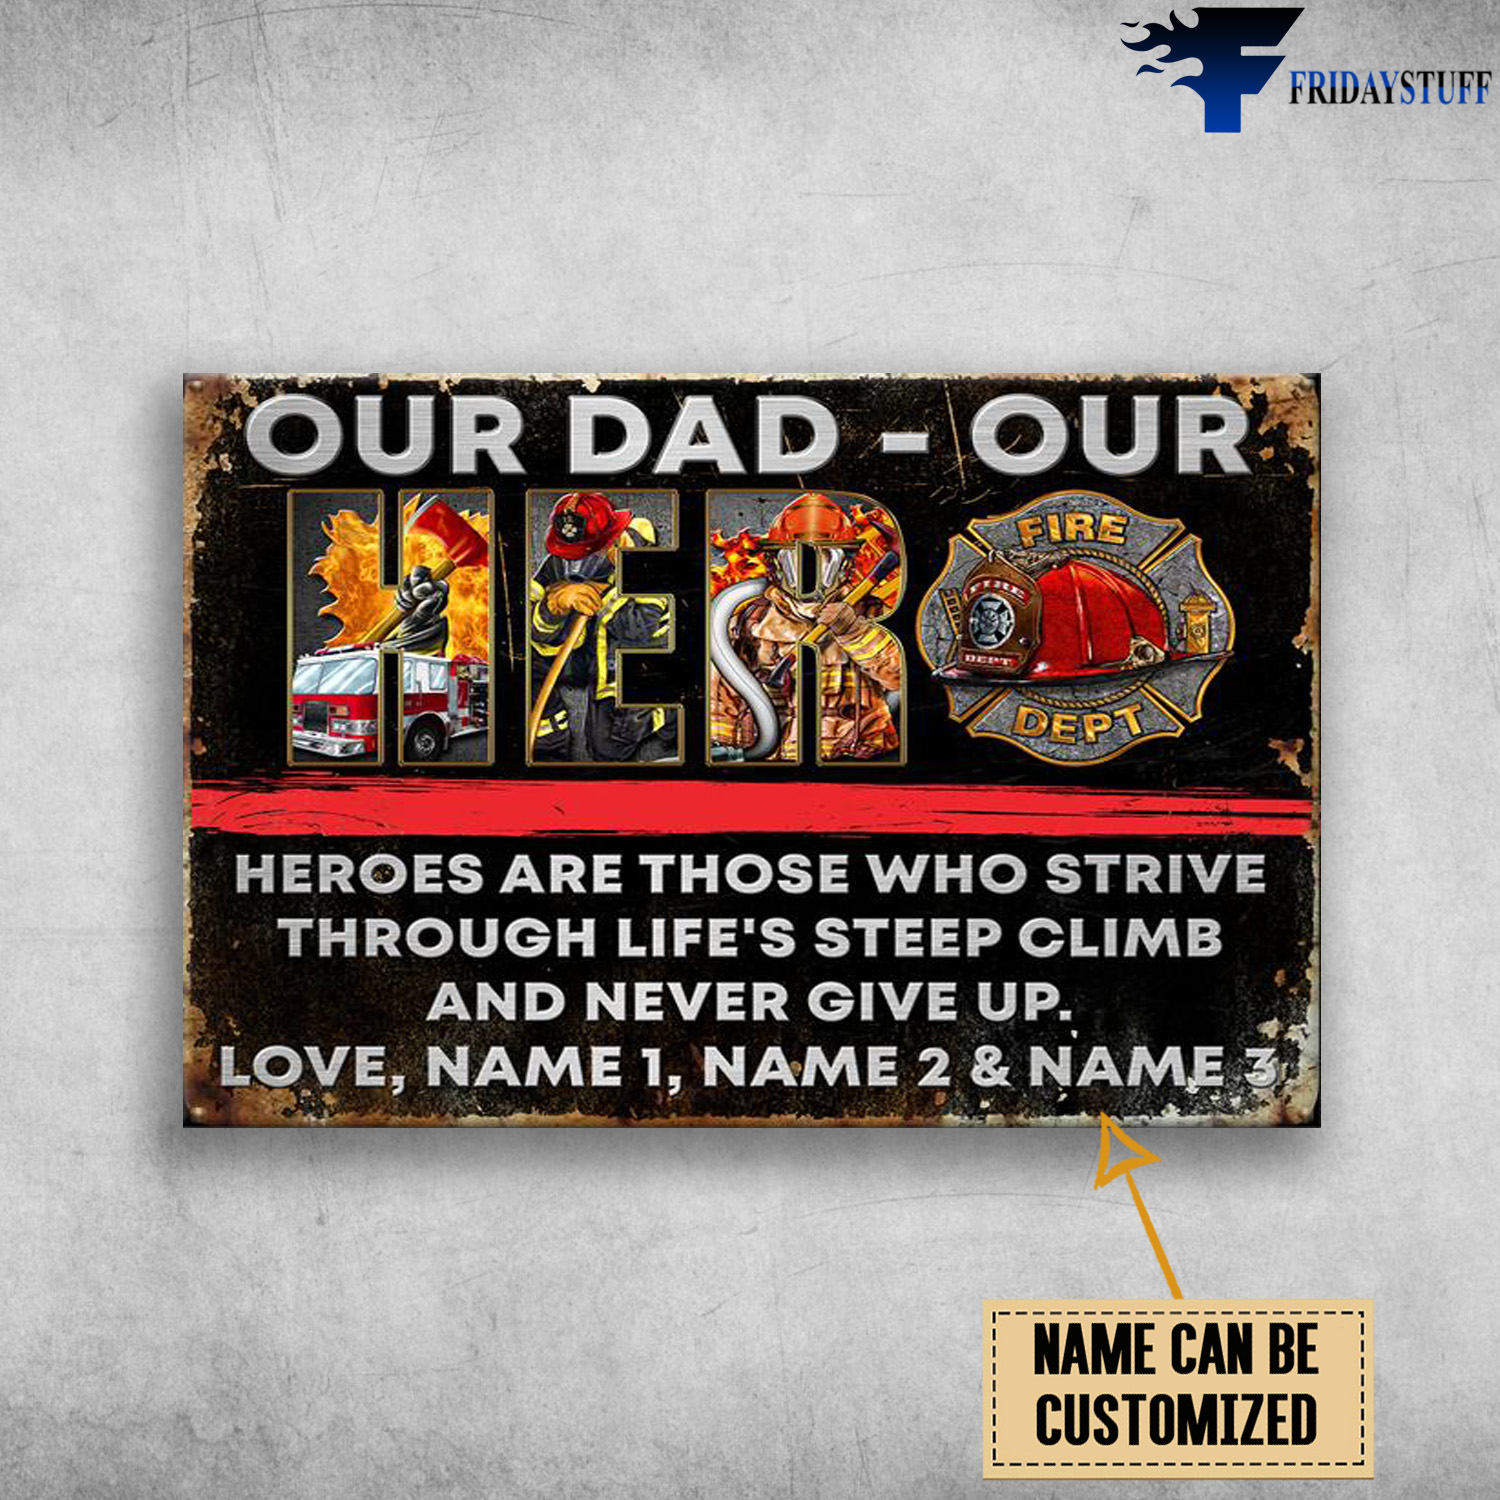 Our Dad, Firefighter, Heroes Are Those, Who Strive, Through Life's Steep Climb, And Never Give Up, Love